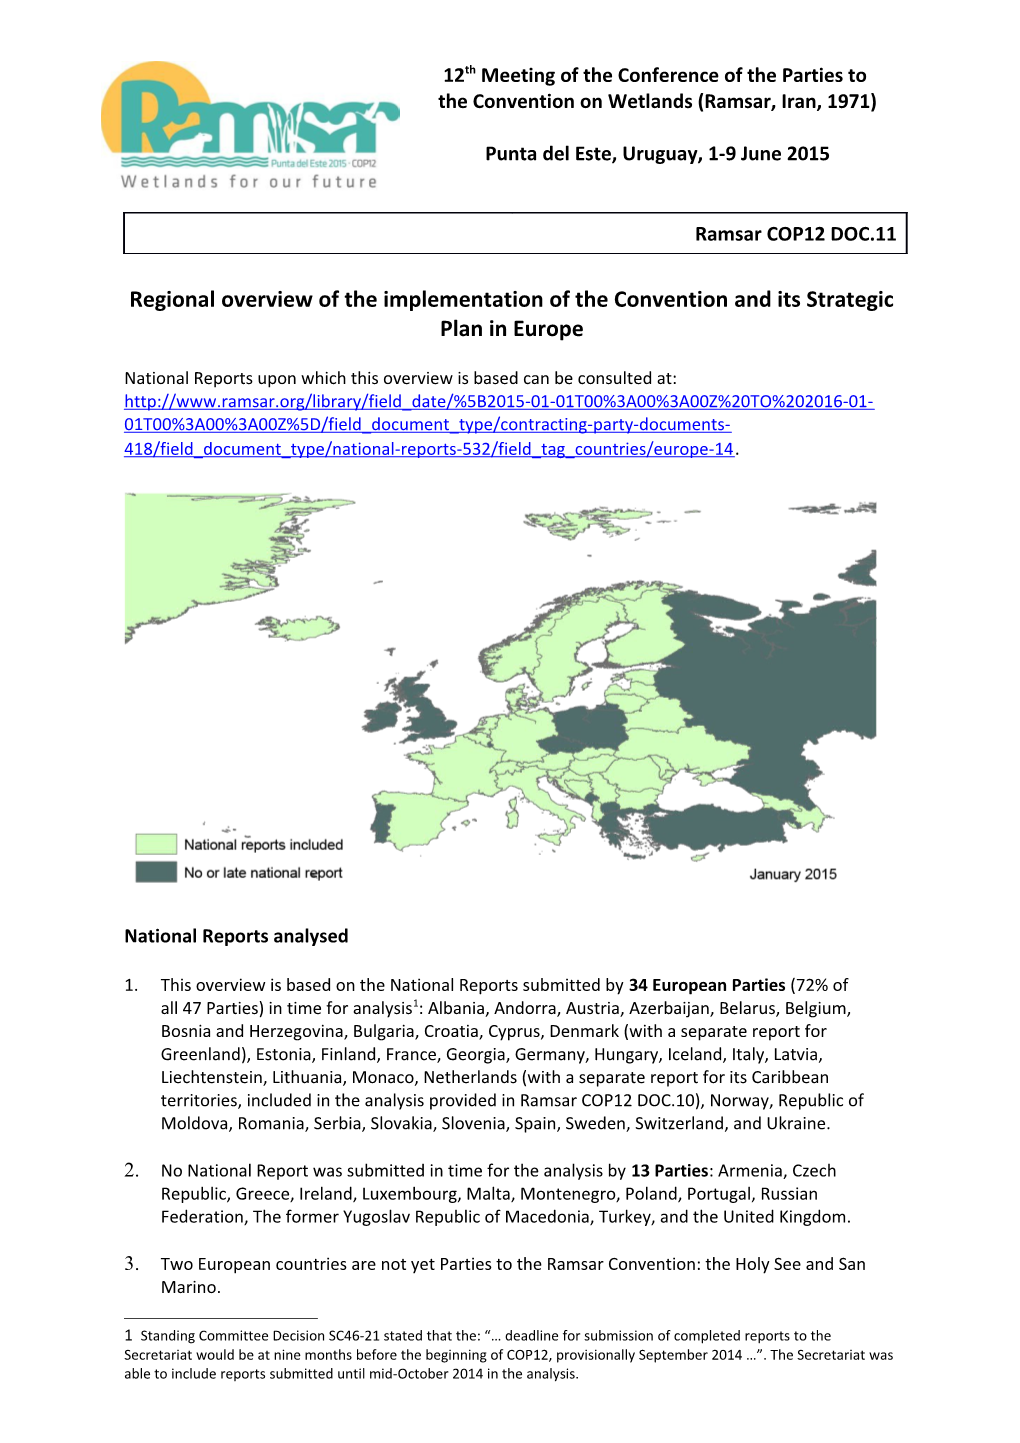 Regional Overview of the Implementation of the Convention and Its Strategic Plan in Europe